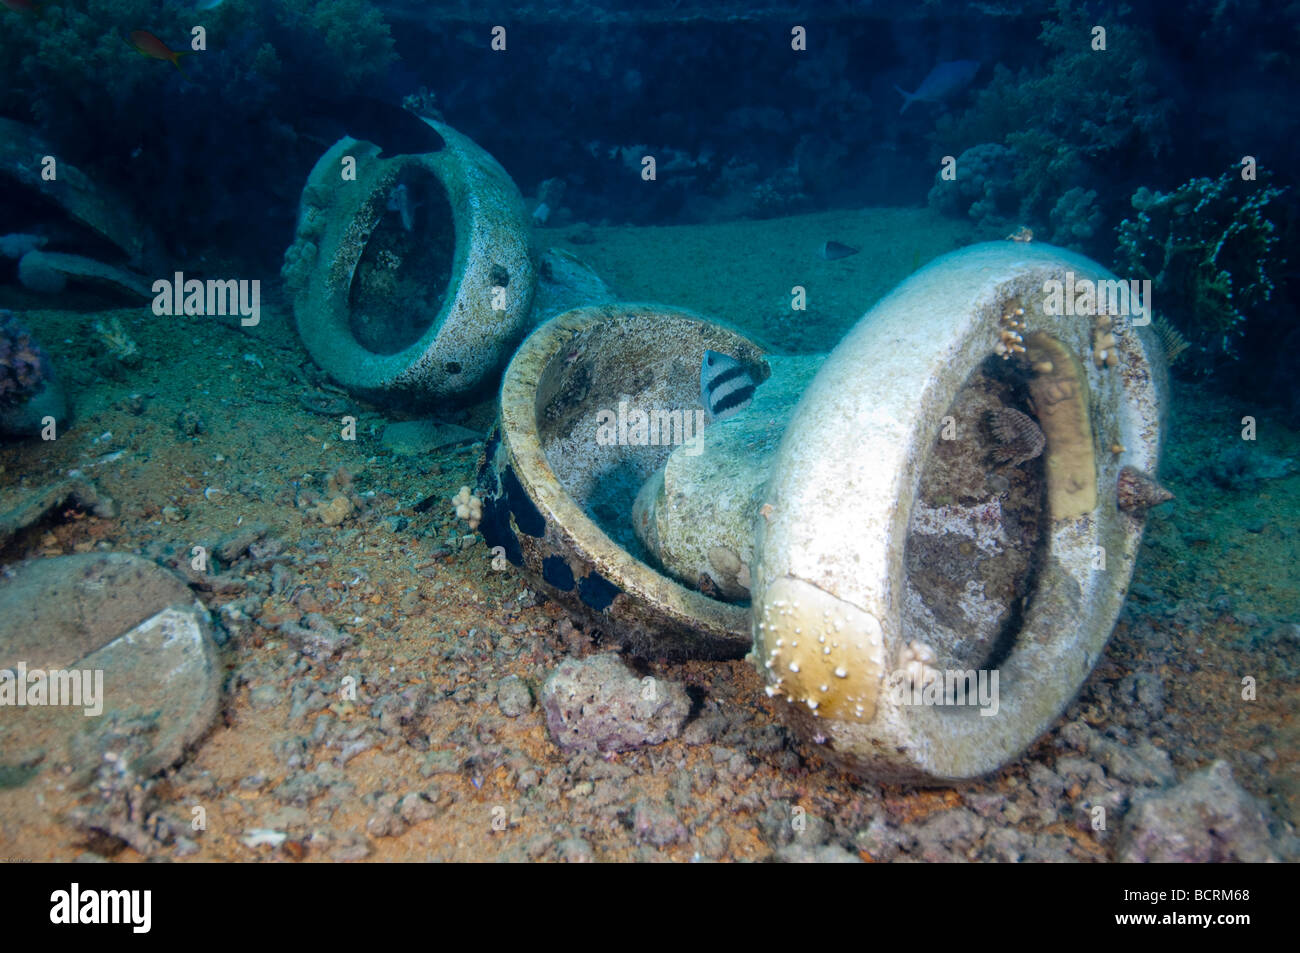 These commodes or toilets are part of the cargo that the Cypriot freighter 'Jolanda' was caring when it sank at Yolanda Reef. Stock Photo